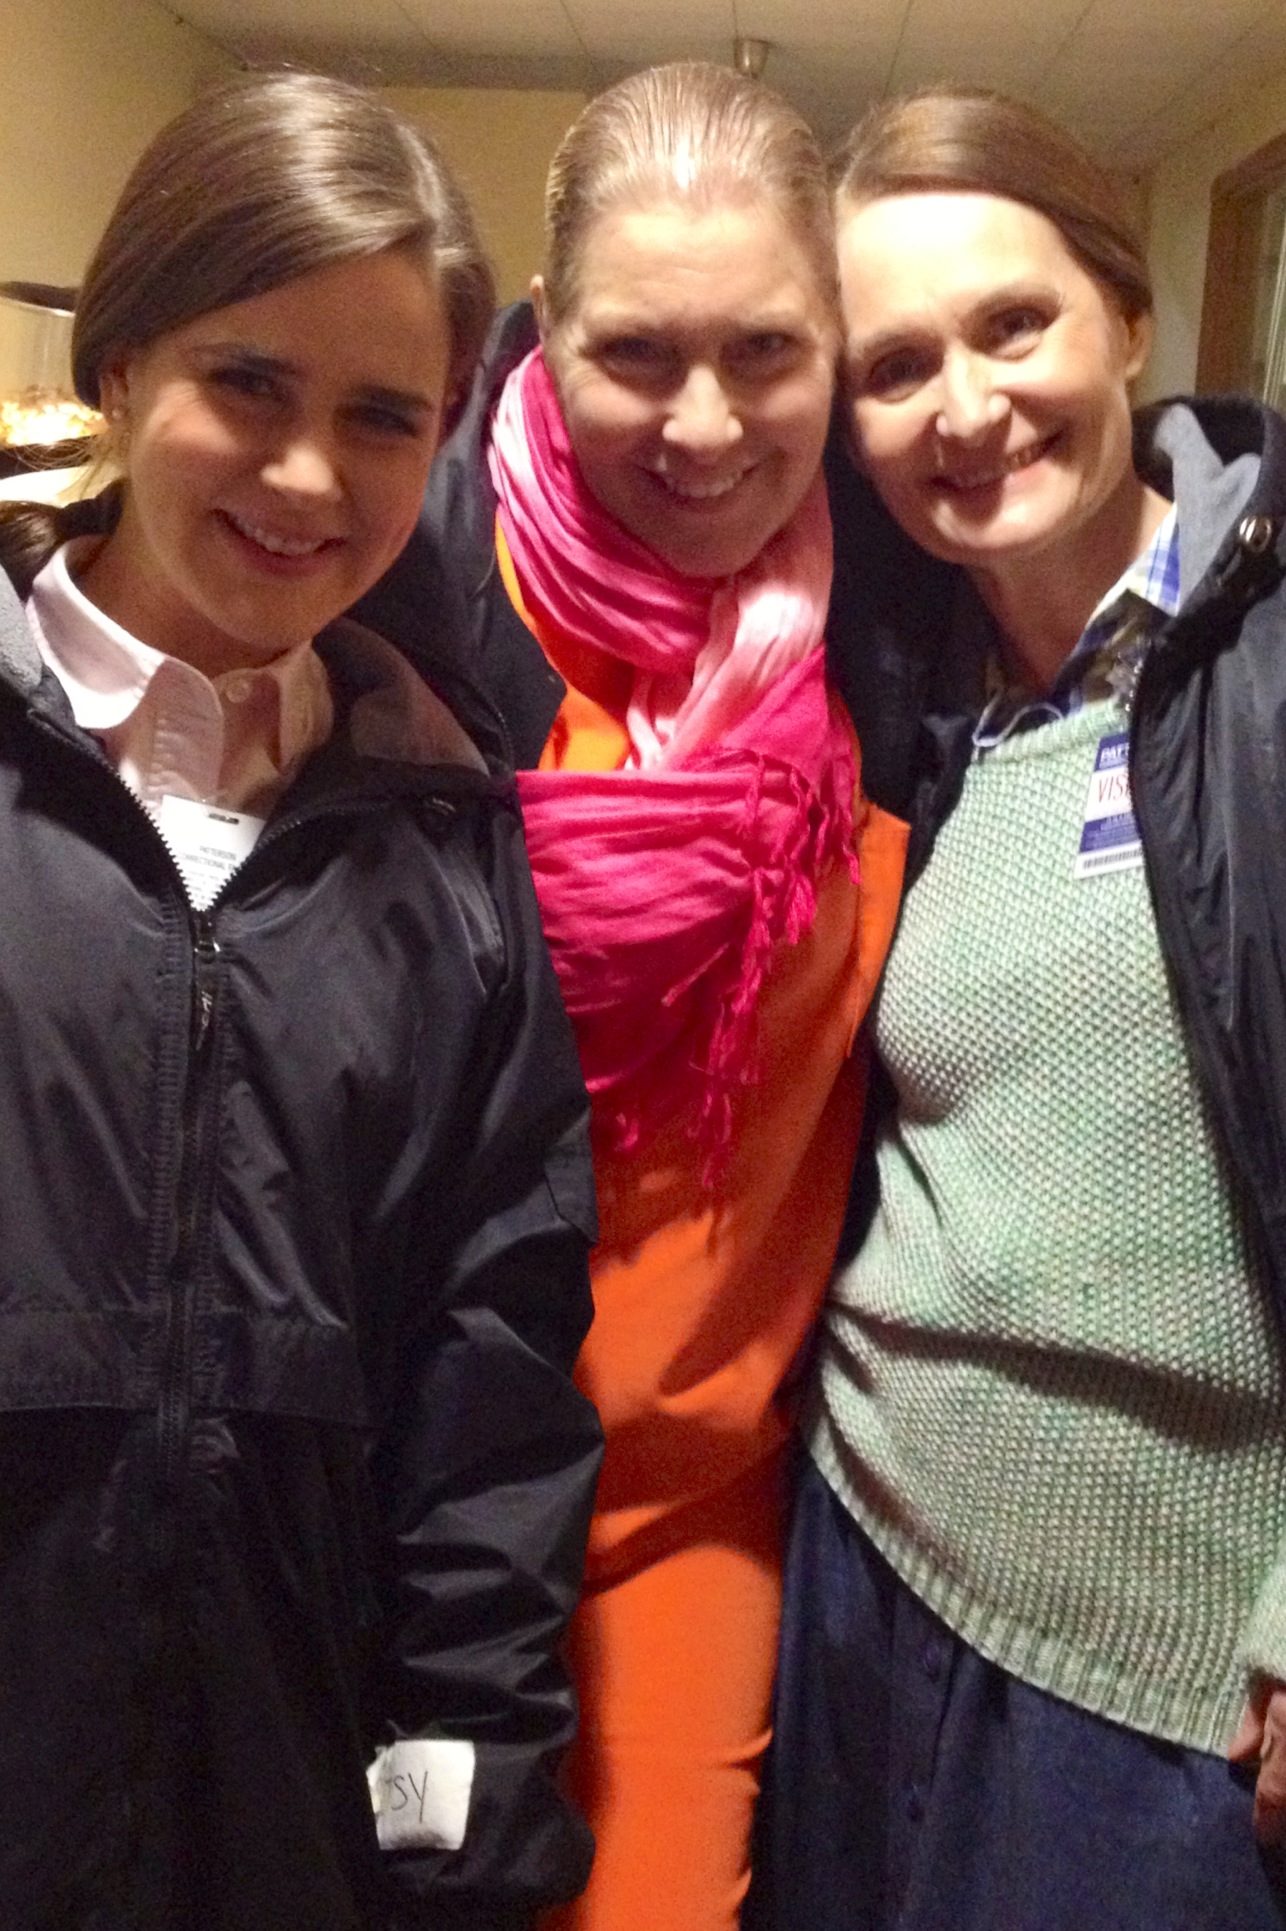 THE MINDY PROJECT ZOE JARMAN, CATHERINE CARLEN AND BETH GRANT...